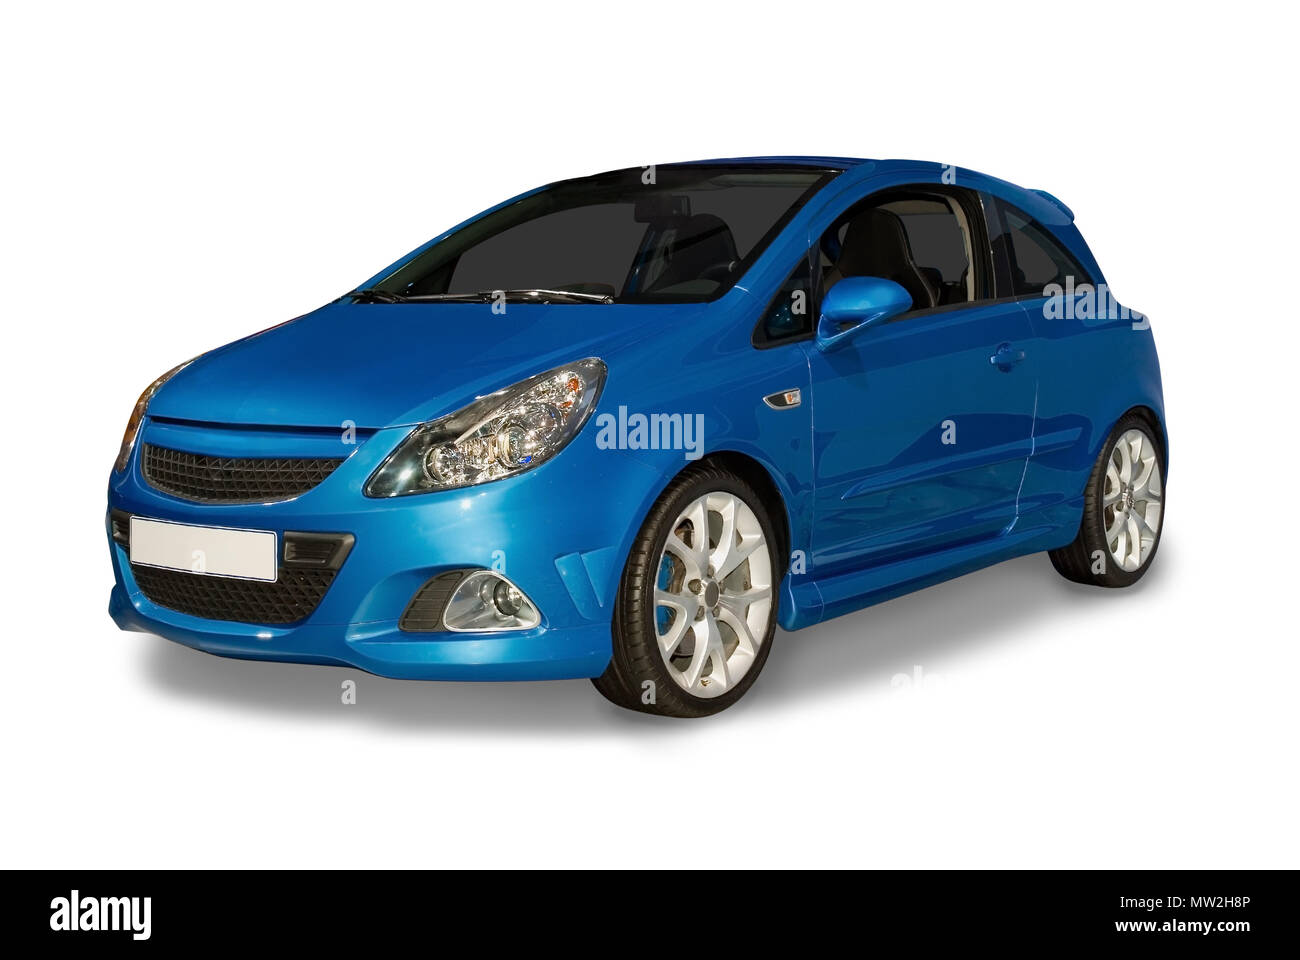 New fuel efficeint blue hybrid car. The smaller  hybrid cars are the future of the industry. Isolated on a white background with a shadow detail drawn Stock Photo